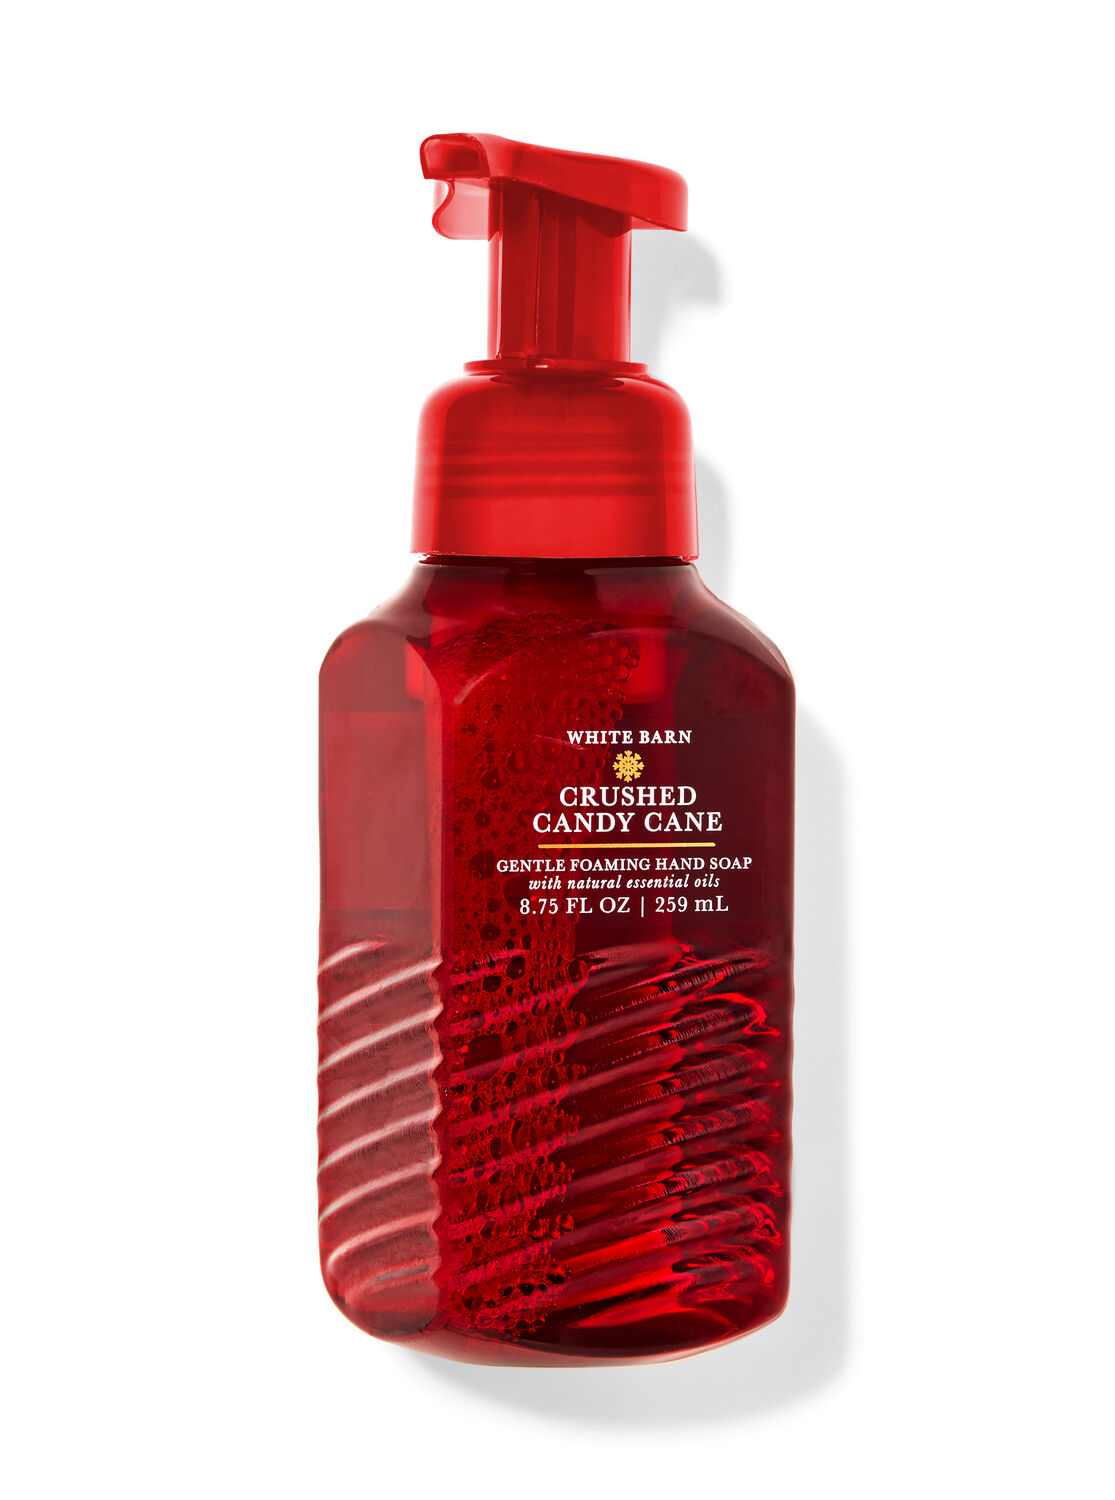 Crushed Candy Cane Gentle Foaming Hand Soap